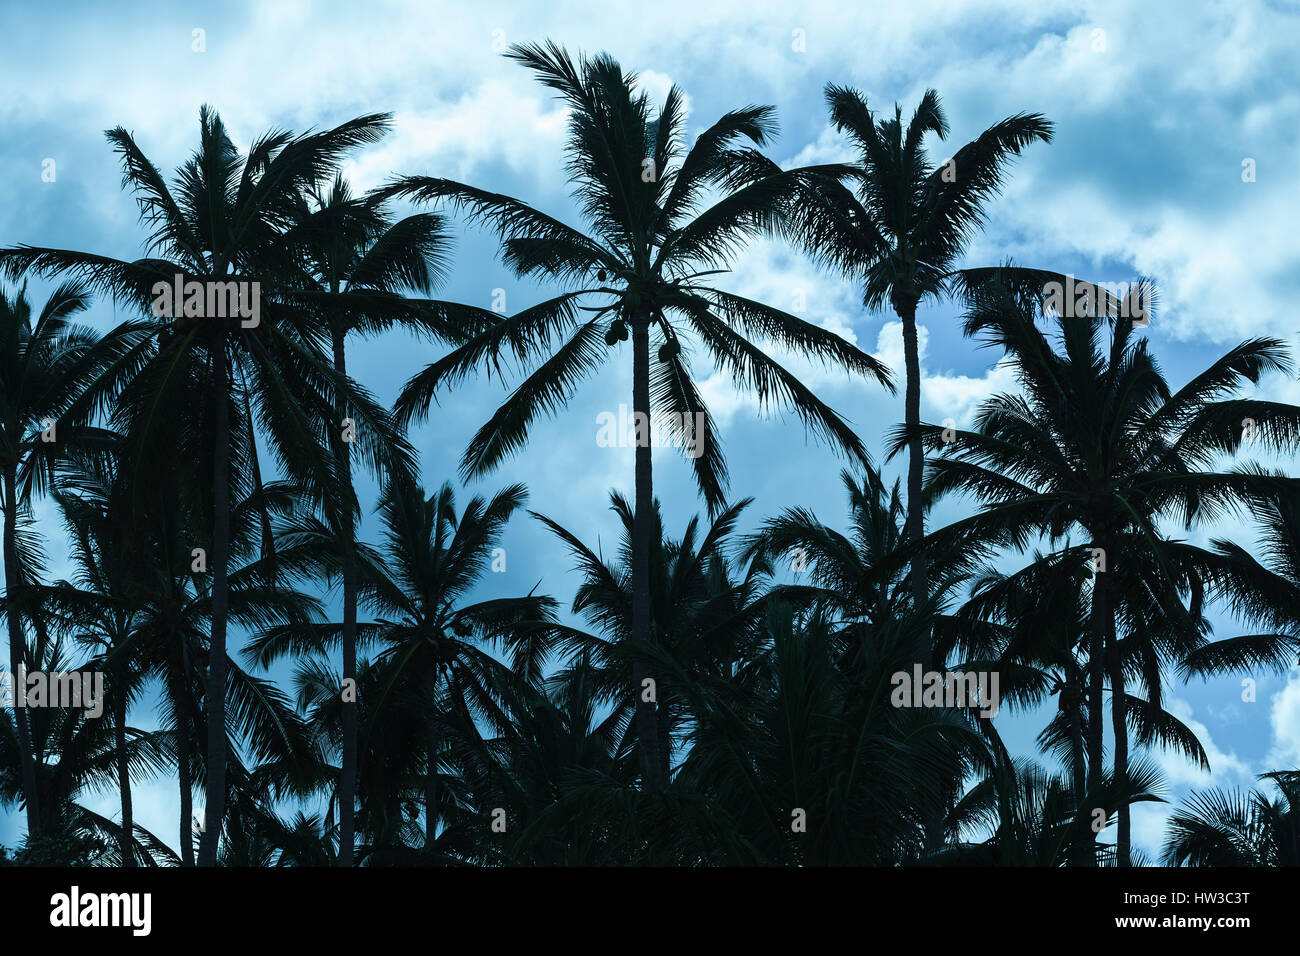 Coconut palm trees silhouettes over blue sky. Stylized photo with blue tonal correction filter effect Stock Photo